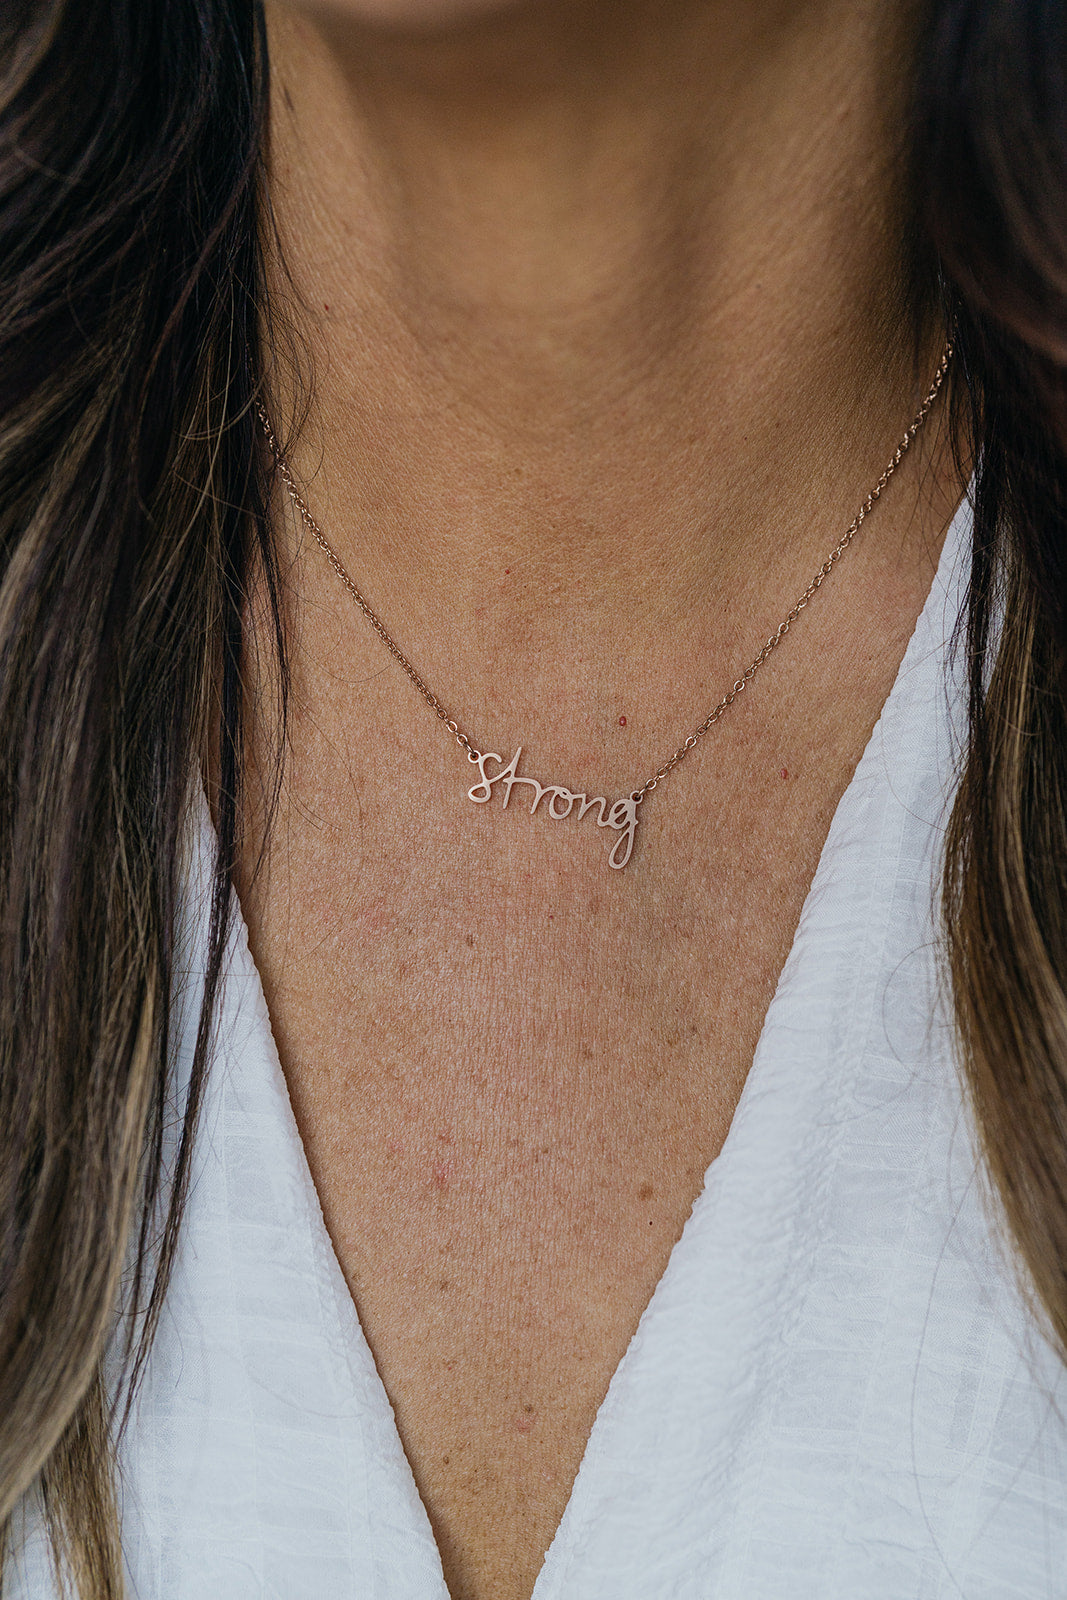 Absolute Affirmation Necklaces